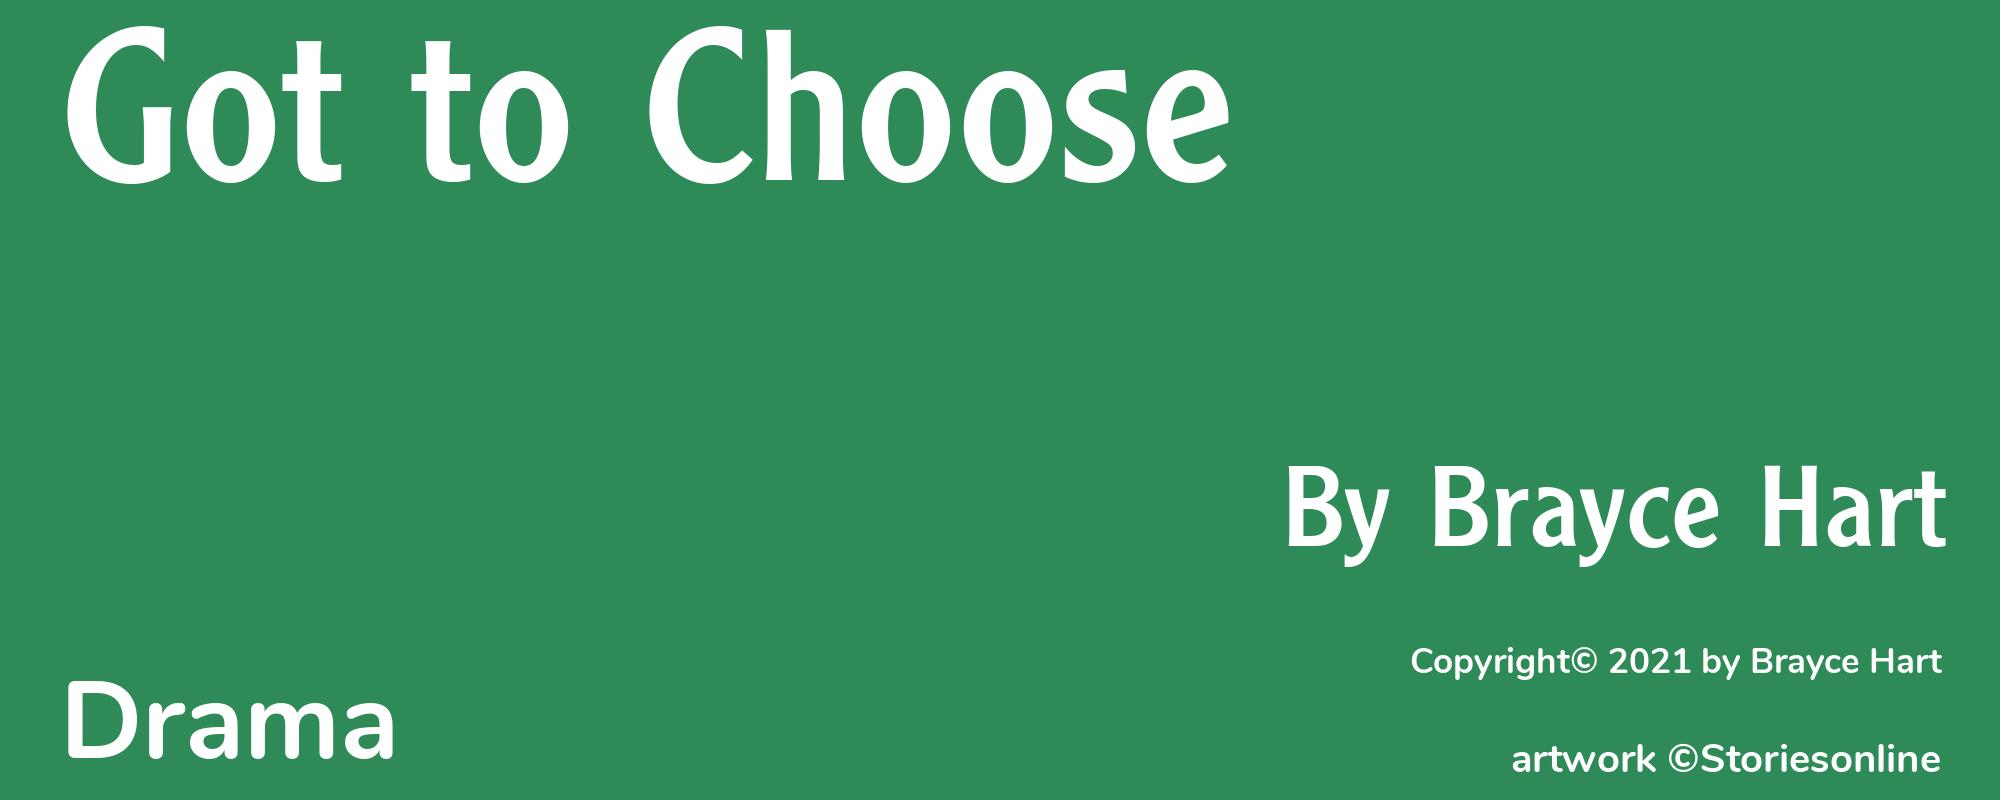 Got to Choose - Cover